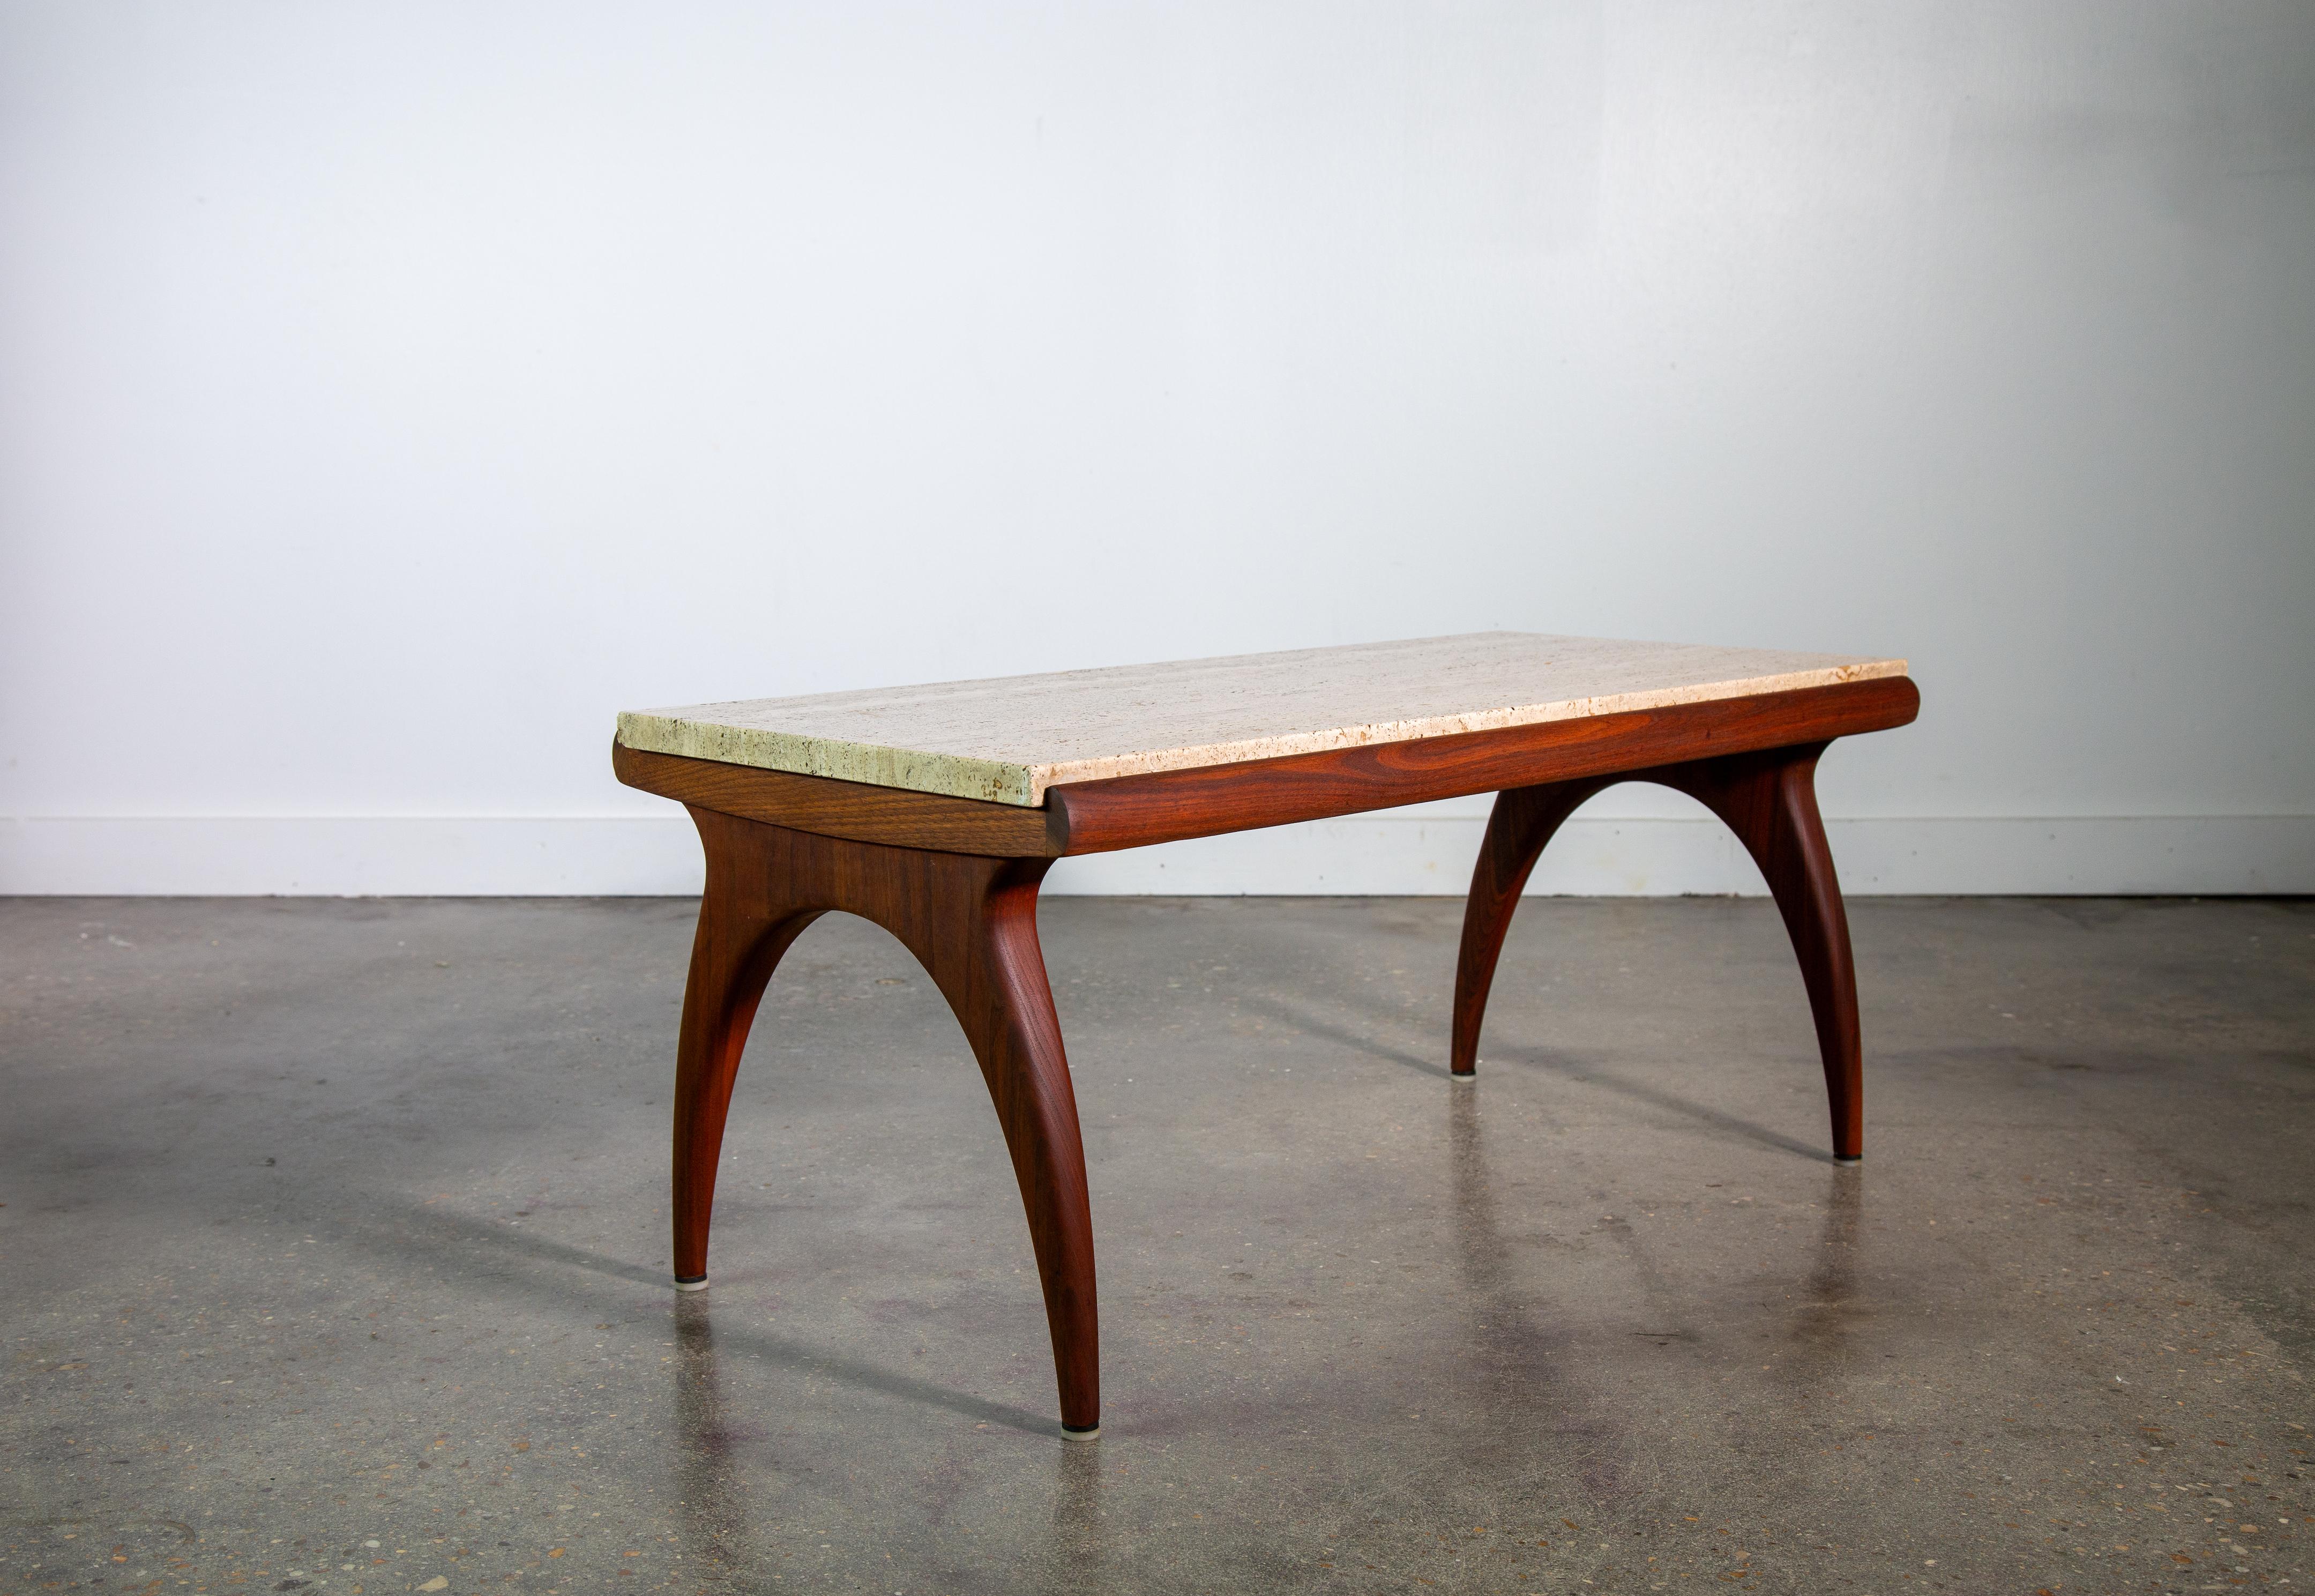 1950s Bertha Schaefer for M. Singer Sons Walnut and Travertine Coffee Table For Sale 4